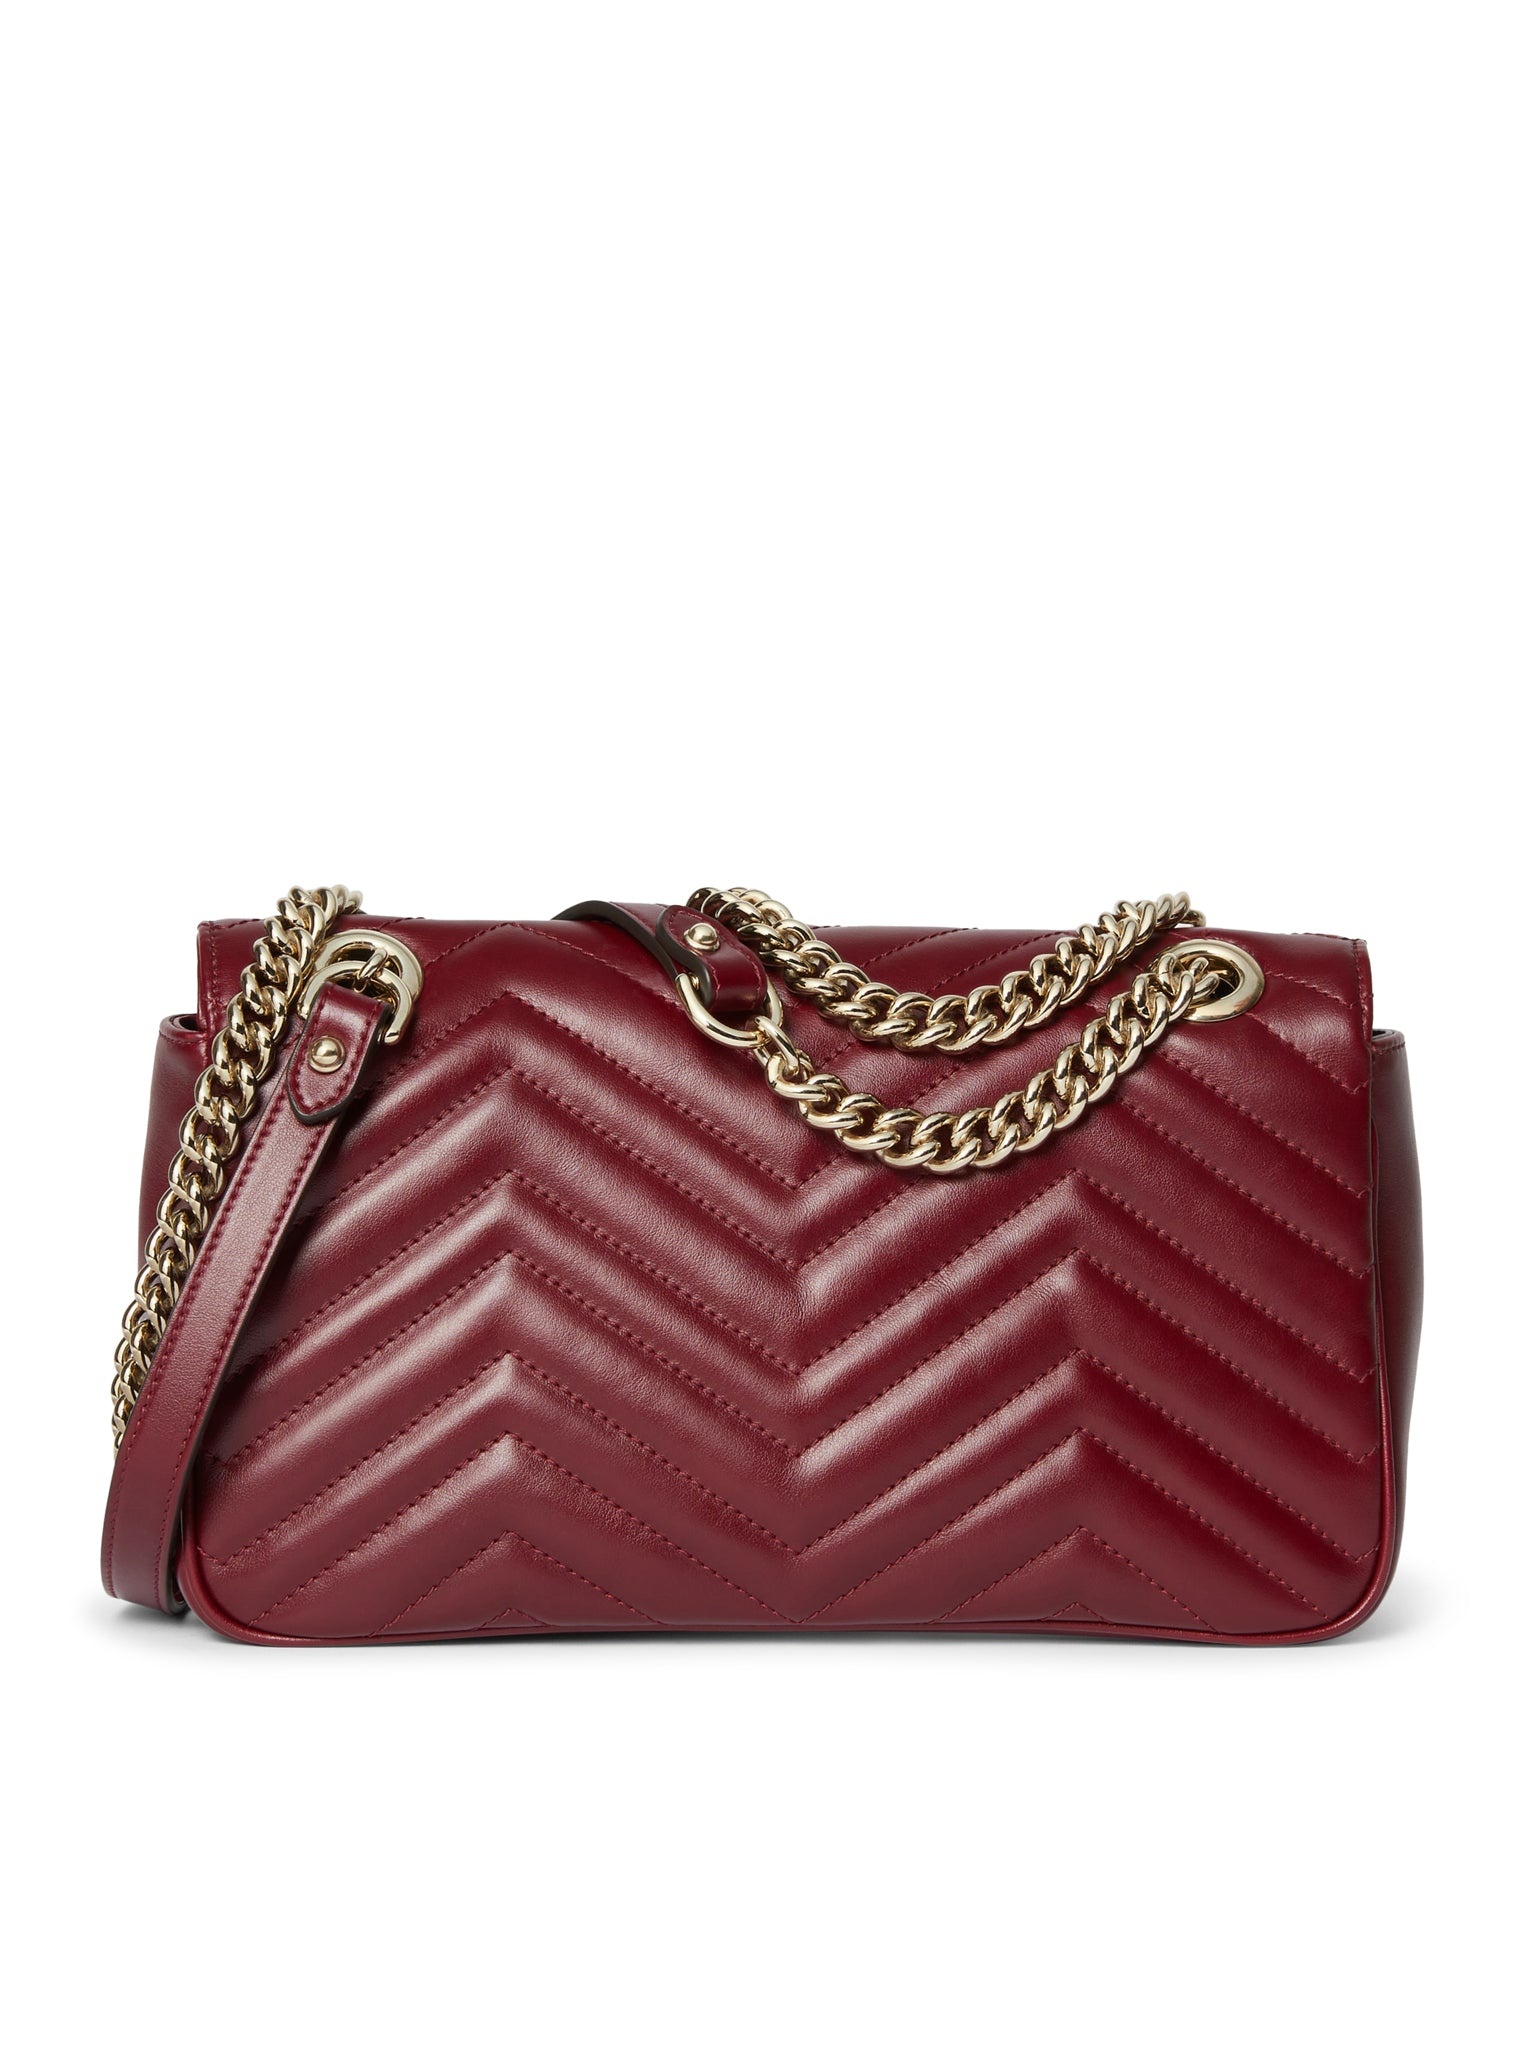 GG MARMONT SMALL SHOULDER BAG - 5